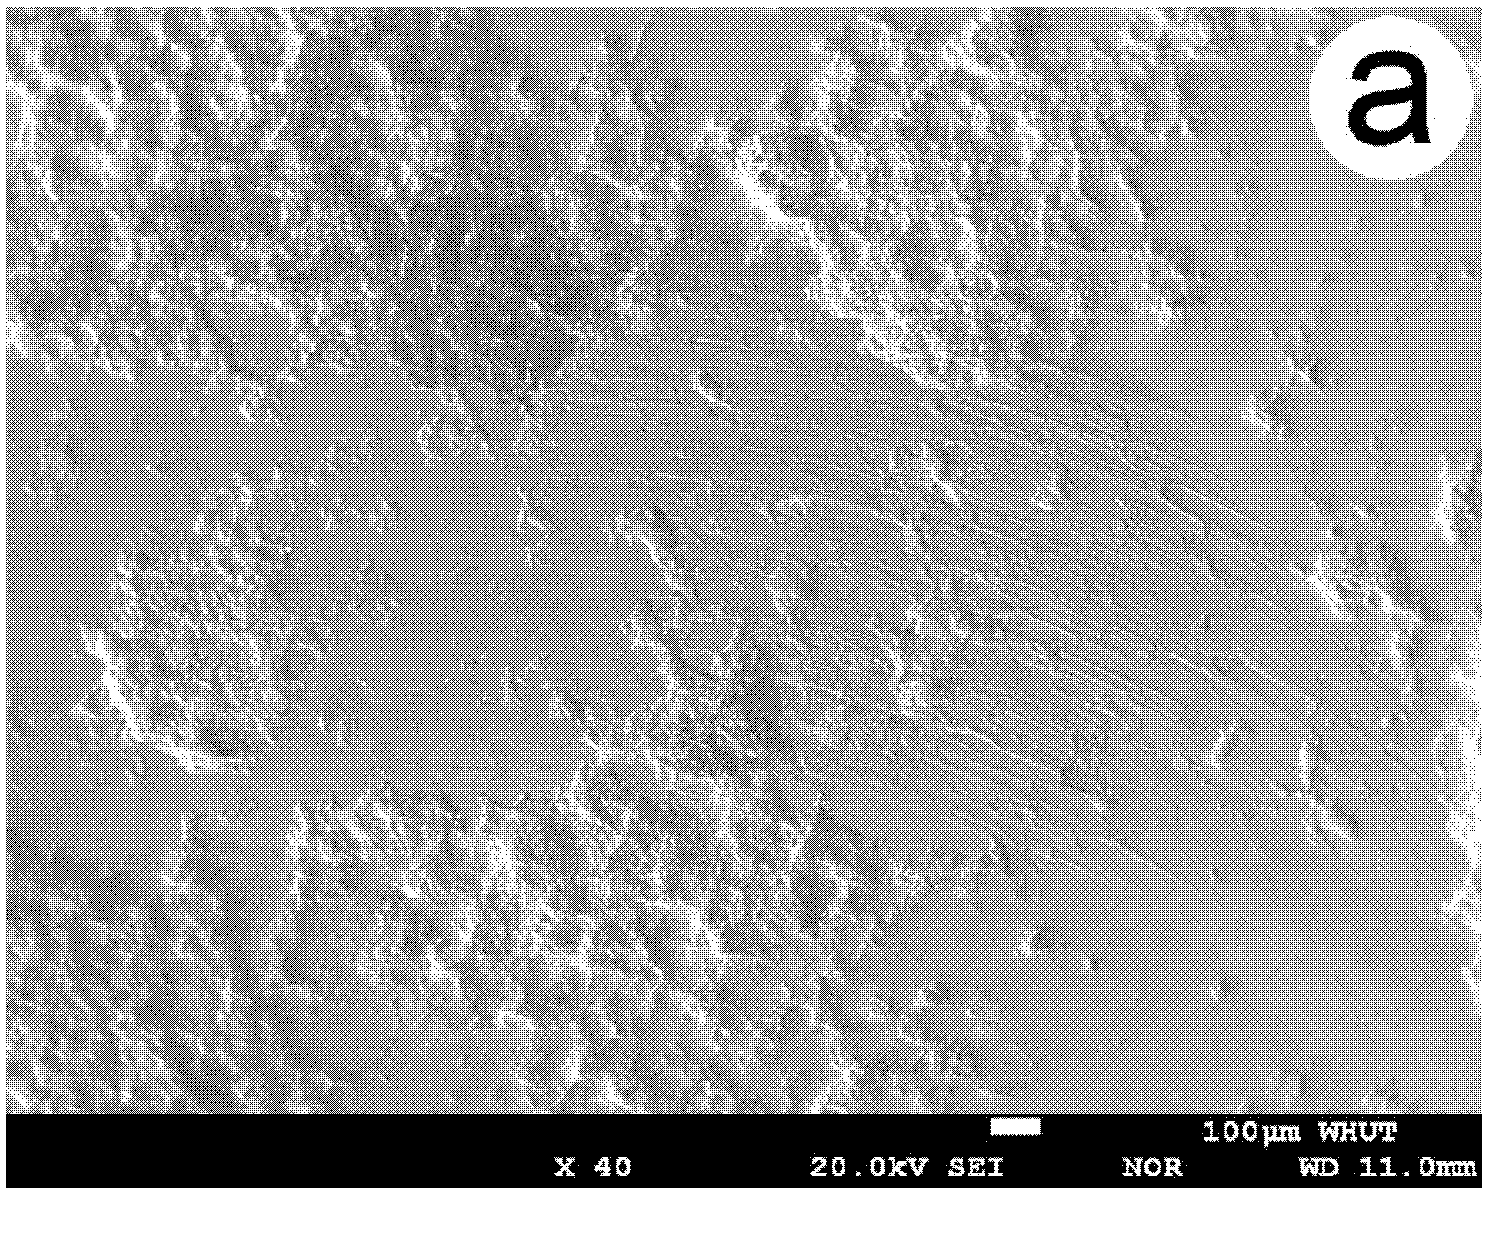 NiAl intermetallic base solid self-lubricating composite material and preparation method thereof